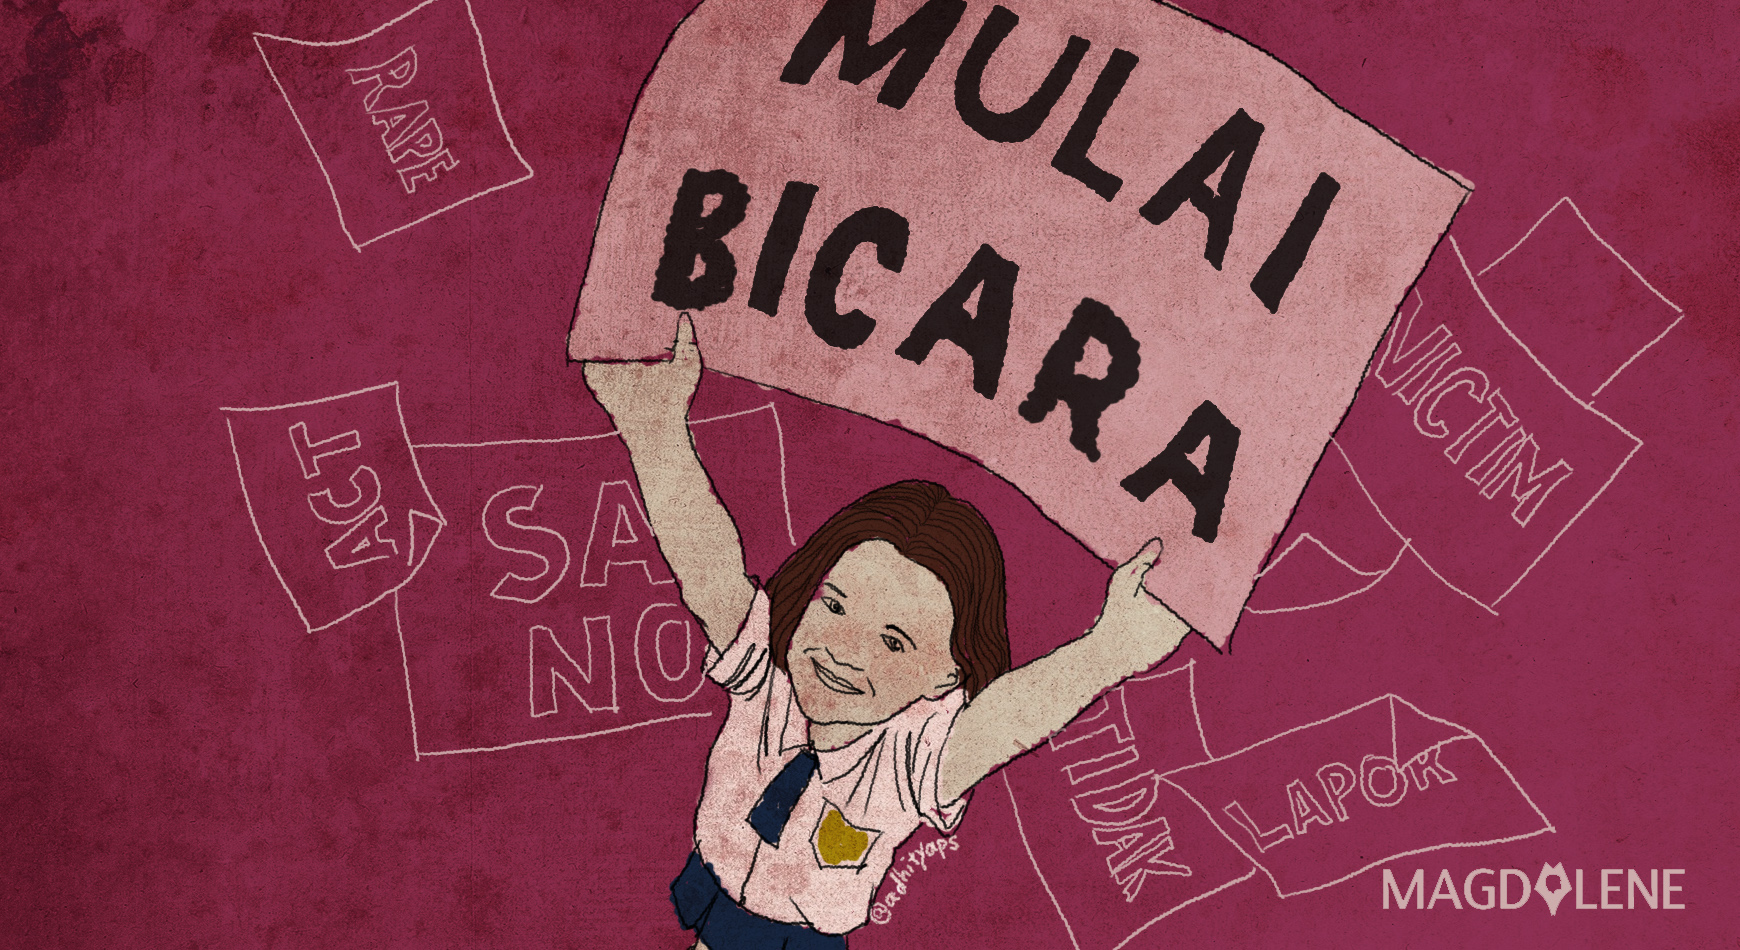 #MulaiBicara Campaign Reaches Out to Teenagers at Schools